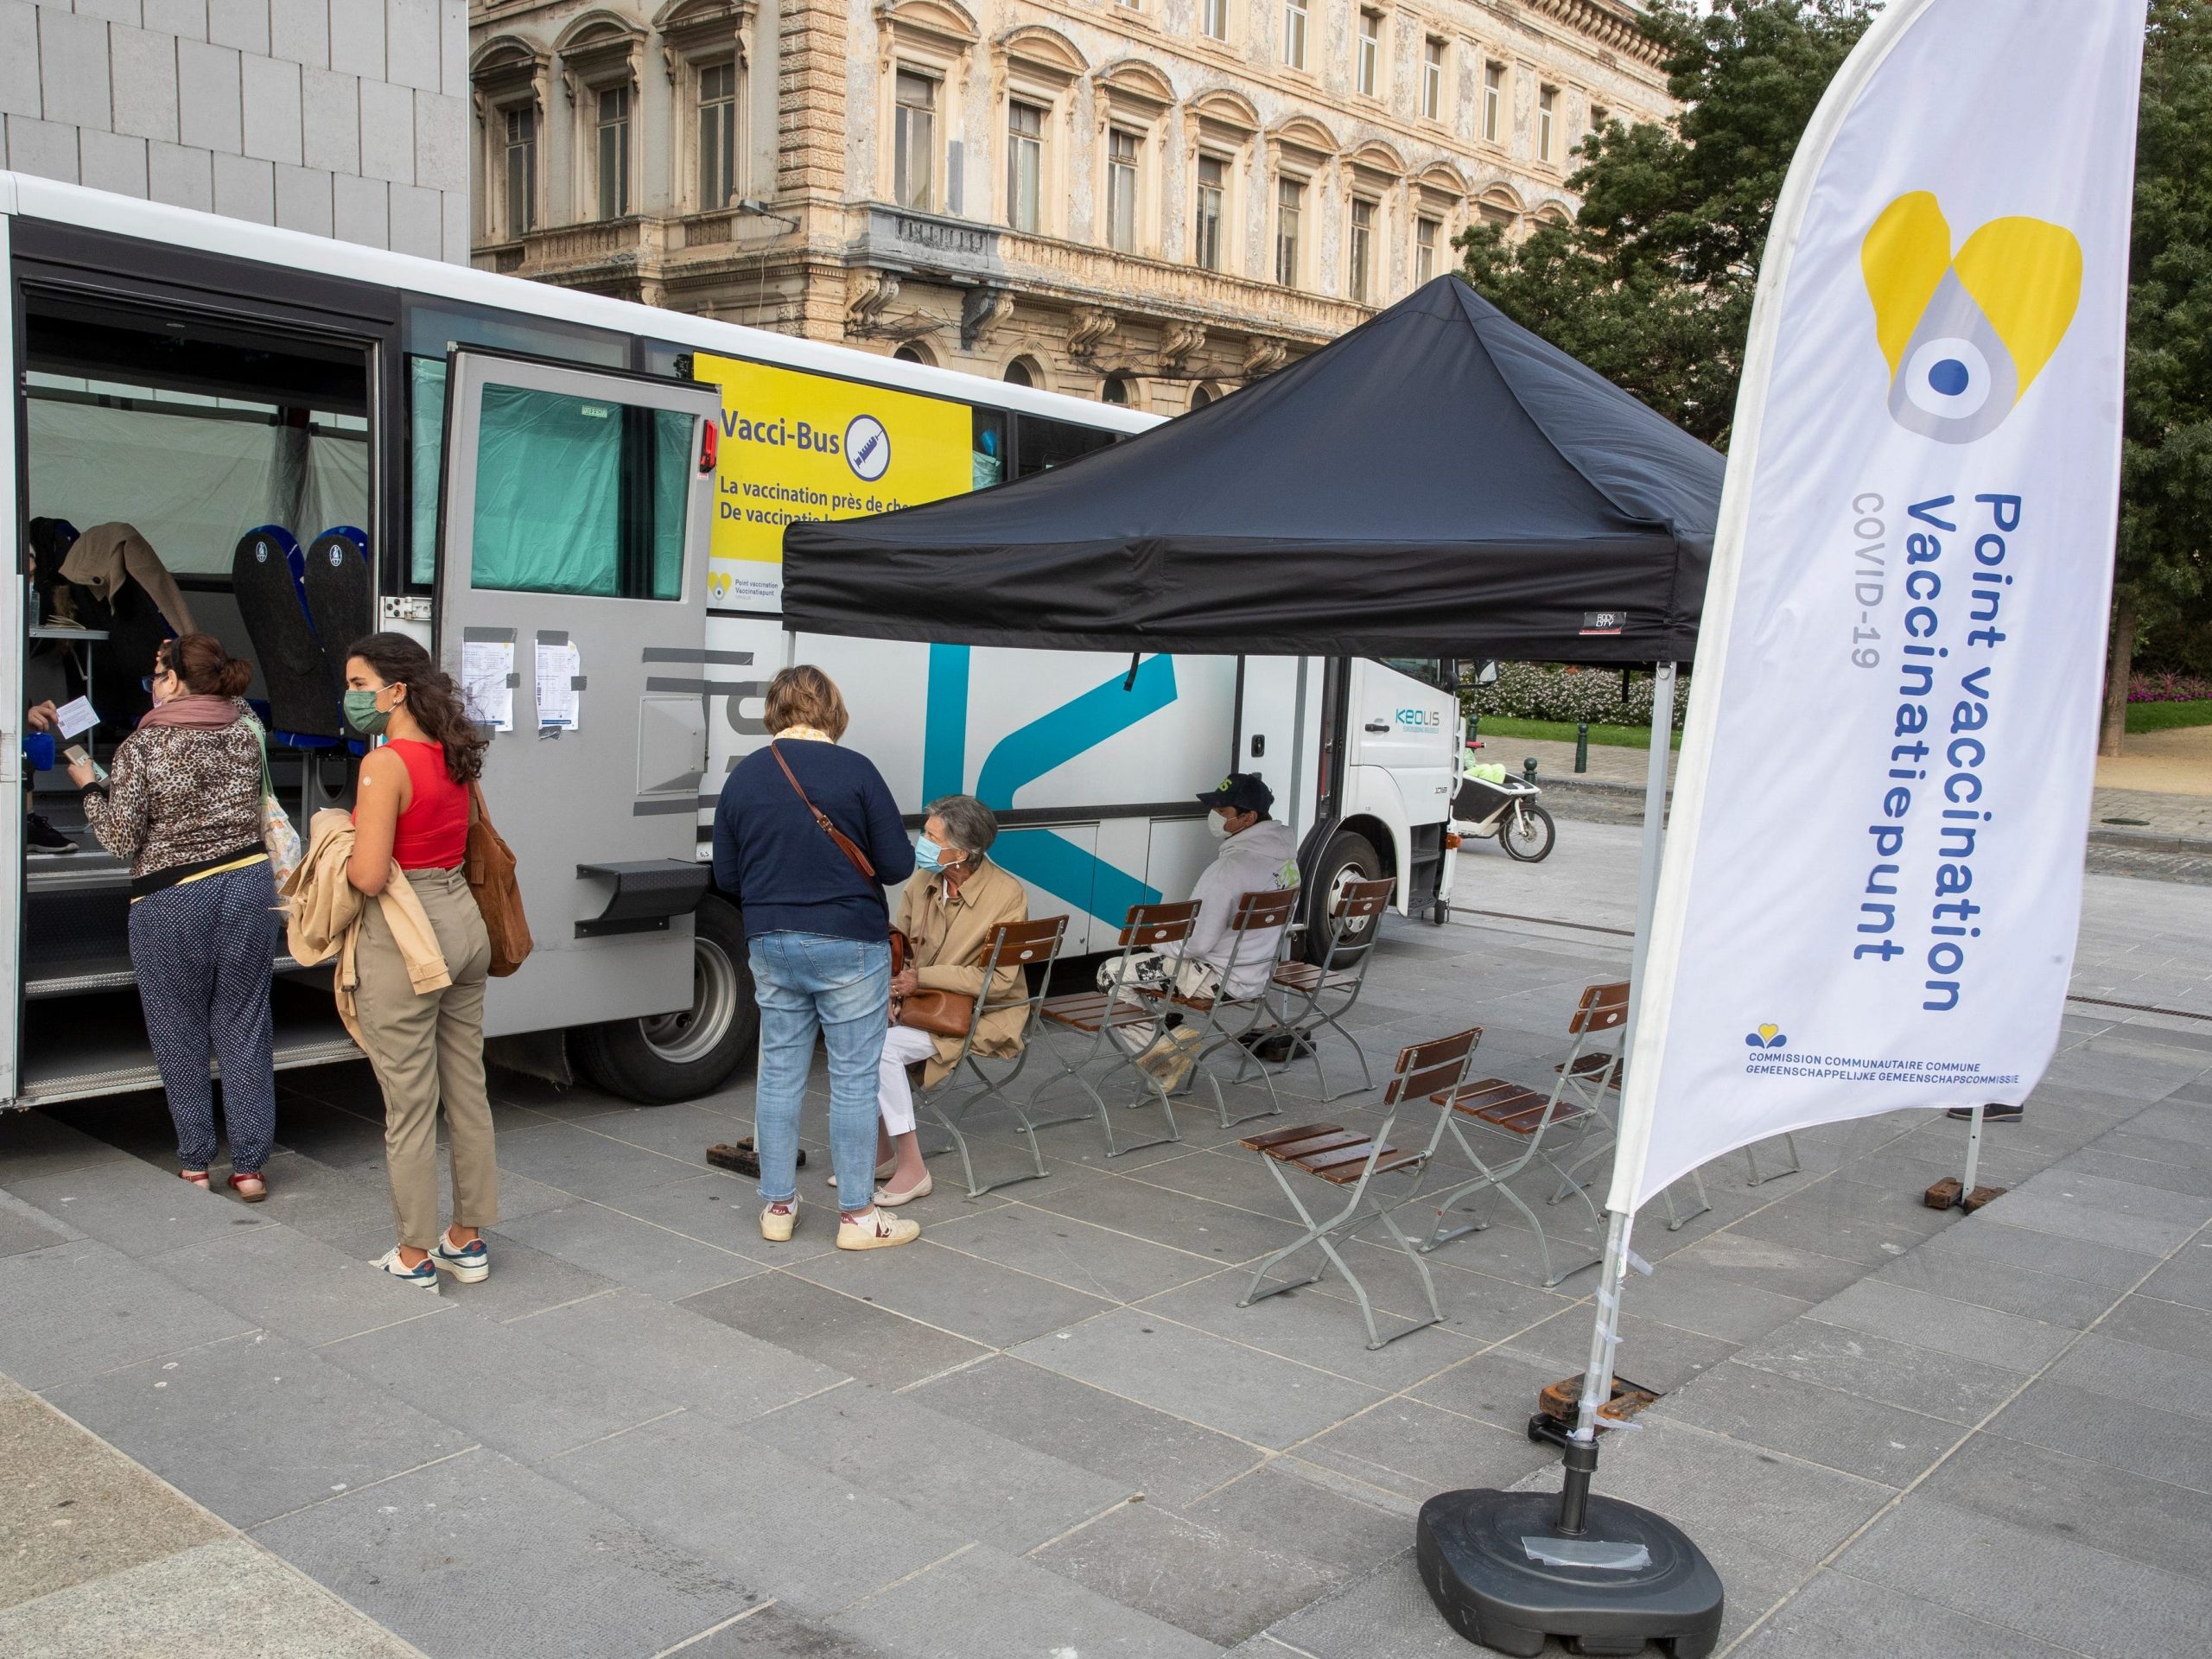 Vacci-bus, a mobile vaccination point, parket at the 'Back to Stage' event, in the center of Brussels, Thursday 19 August 2021.